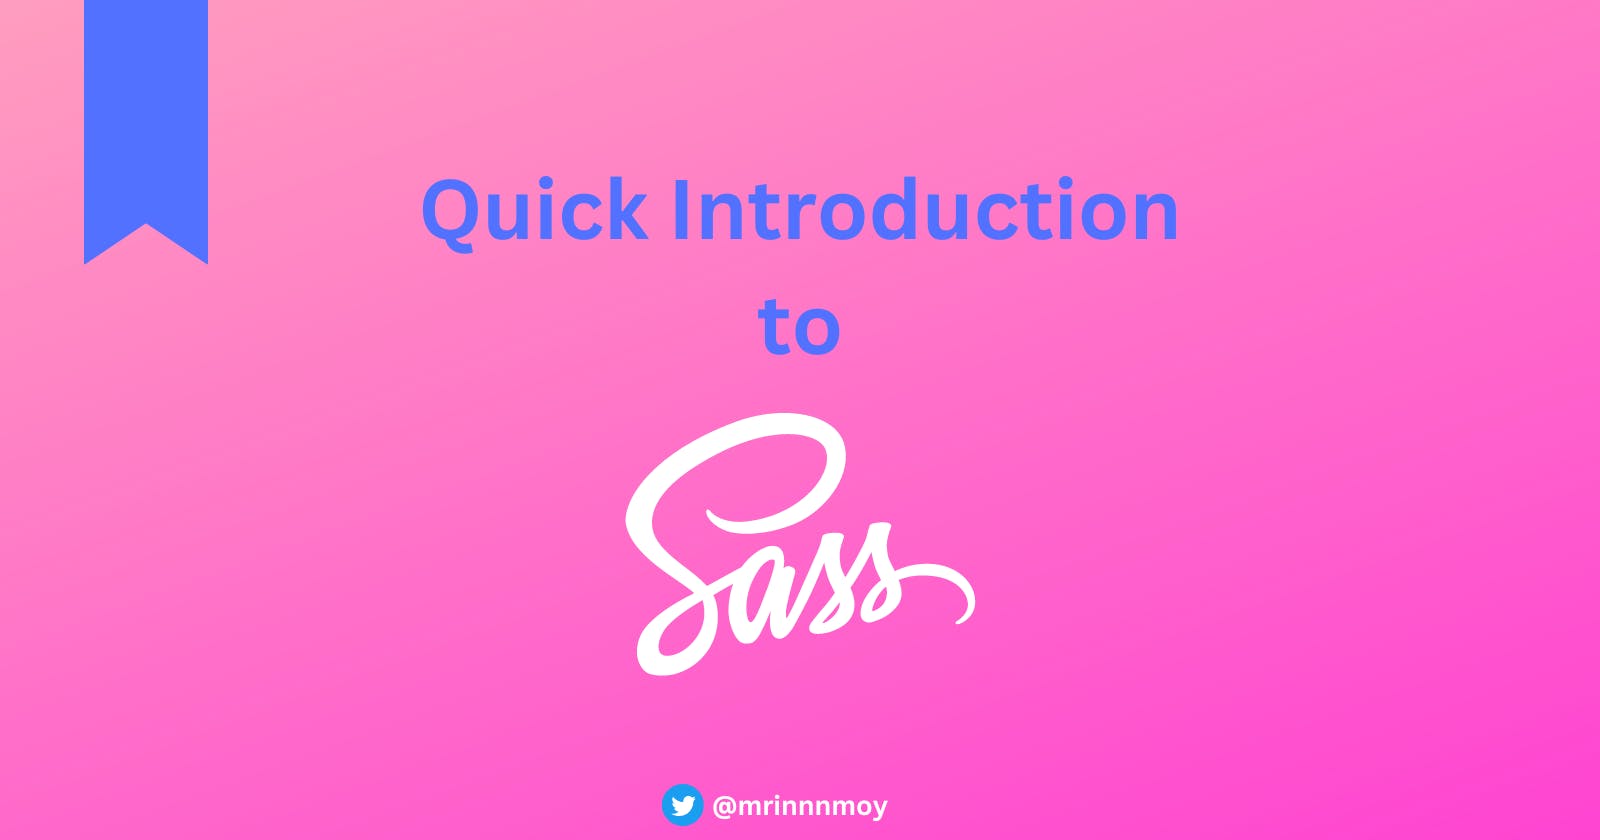 Quick introduction to SASS/SCSS